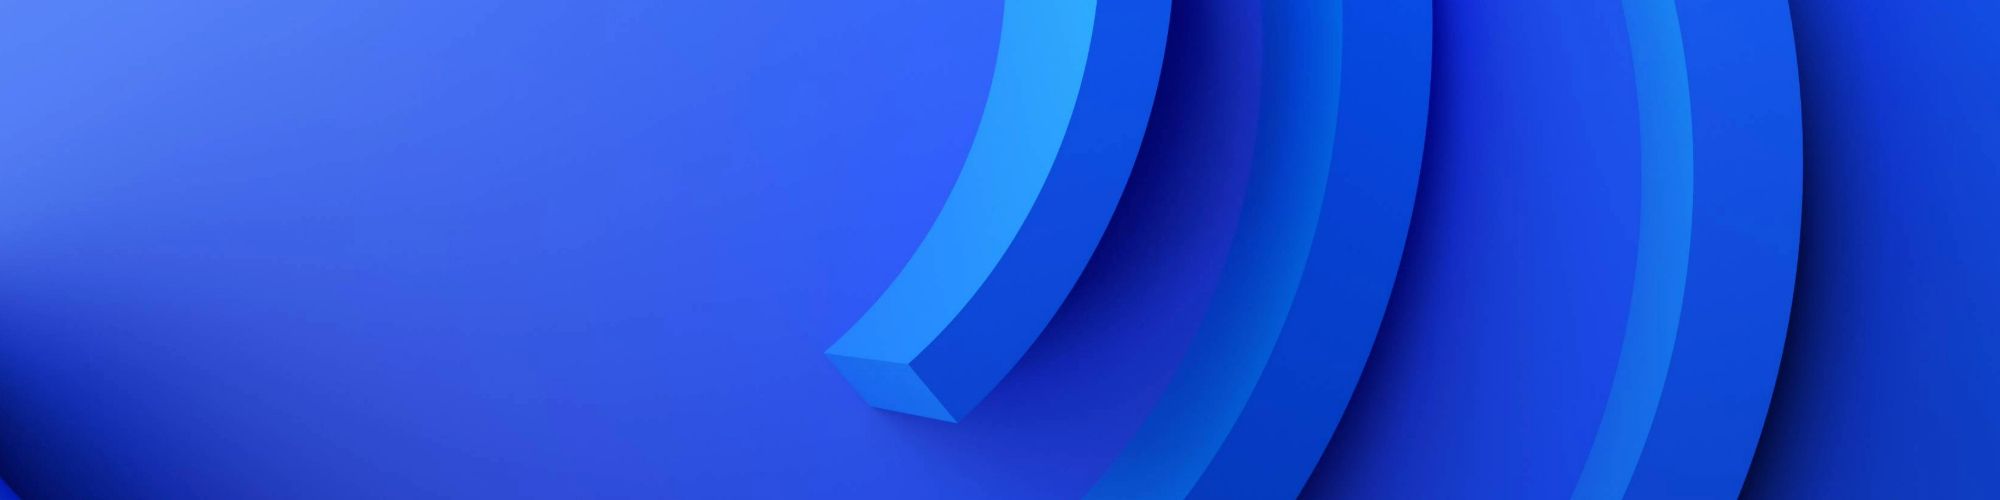 abstract curved shapes with a blue background